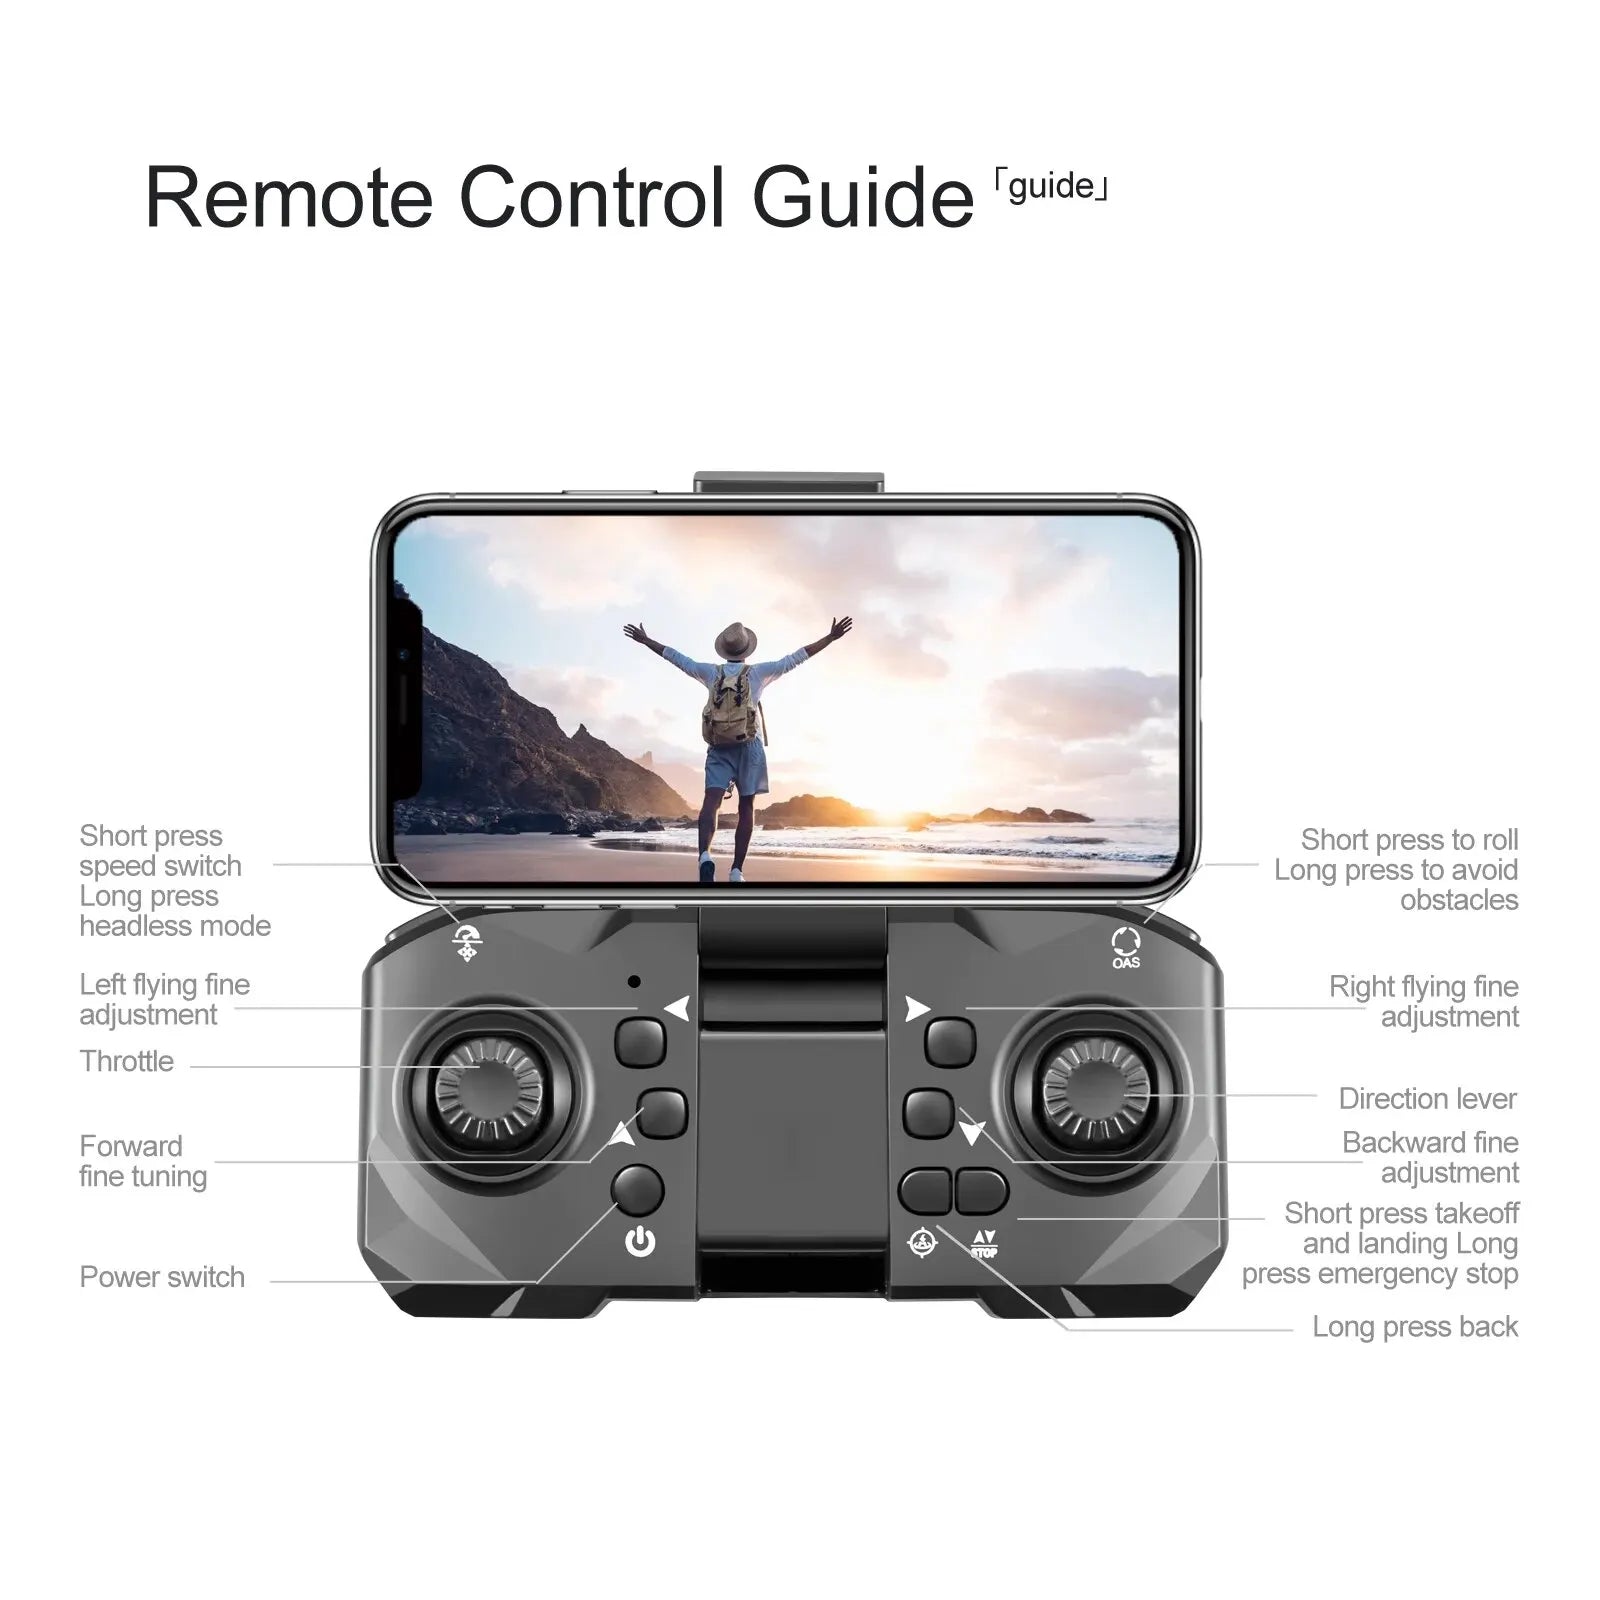 S92 Drone, remote control guide tguideu short press to roll speed switch long